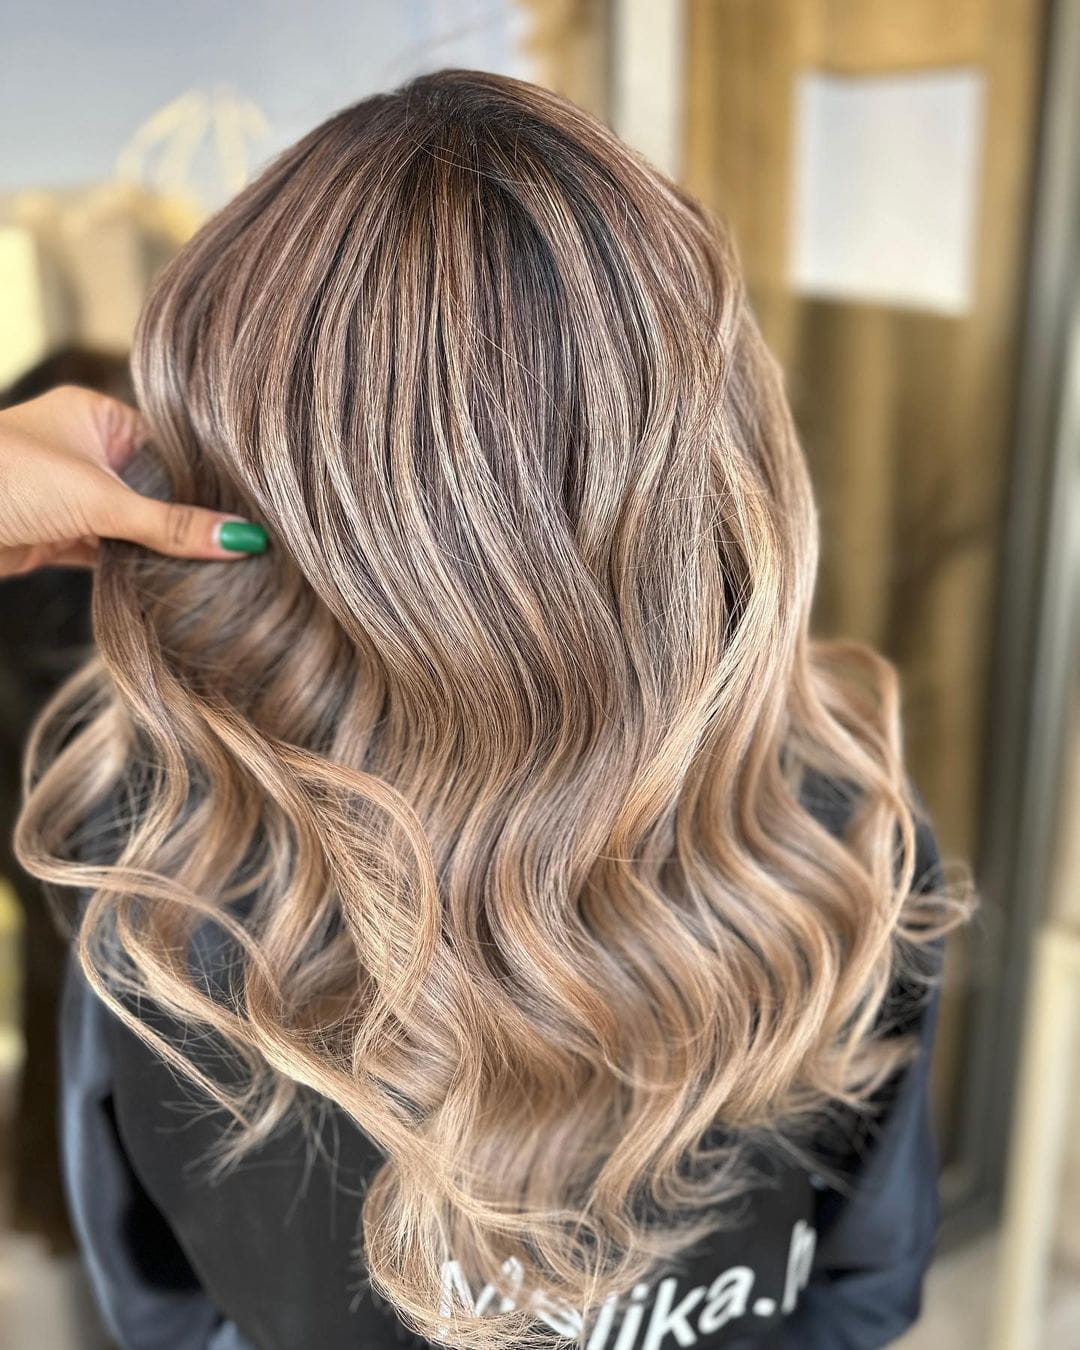 100+ Hairstyle And Hair Colors For Winter That Are Trending images 21